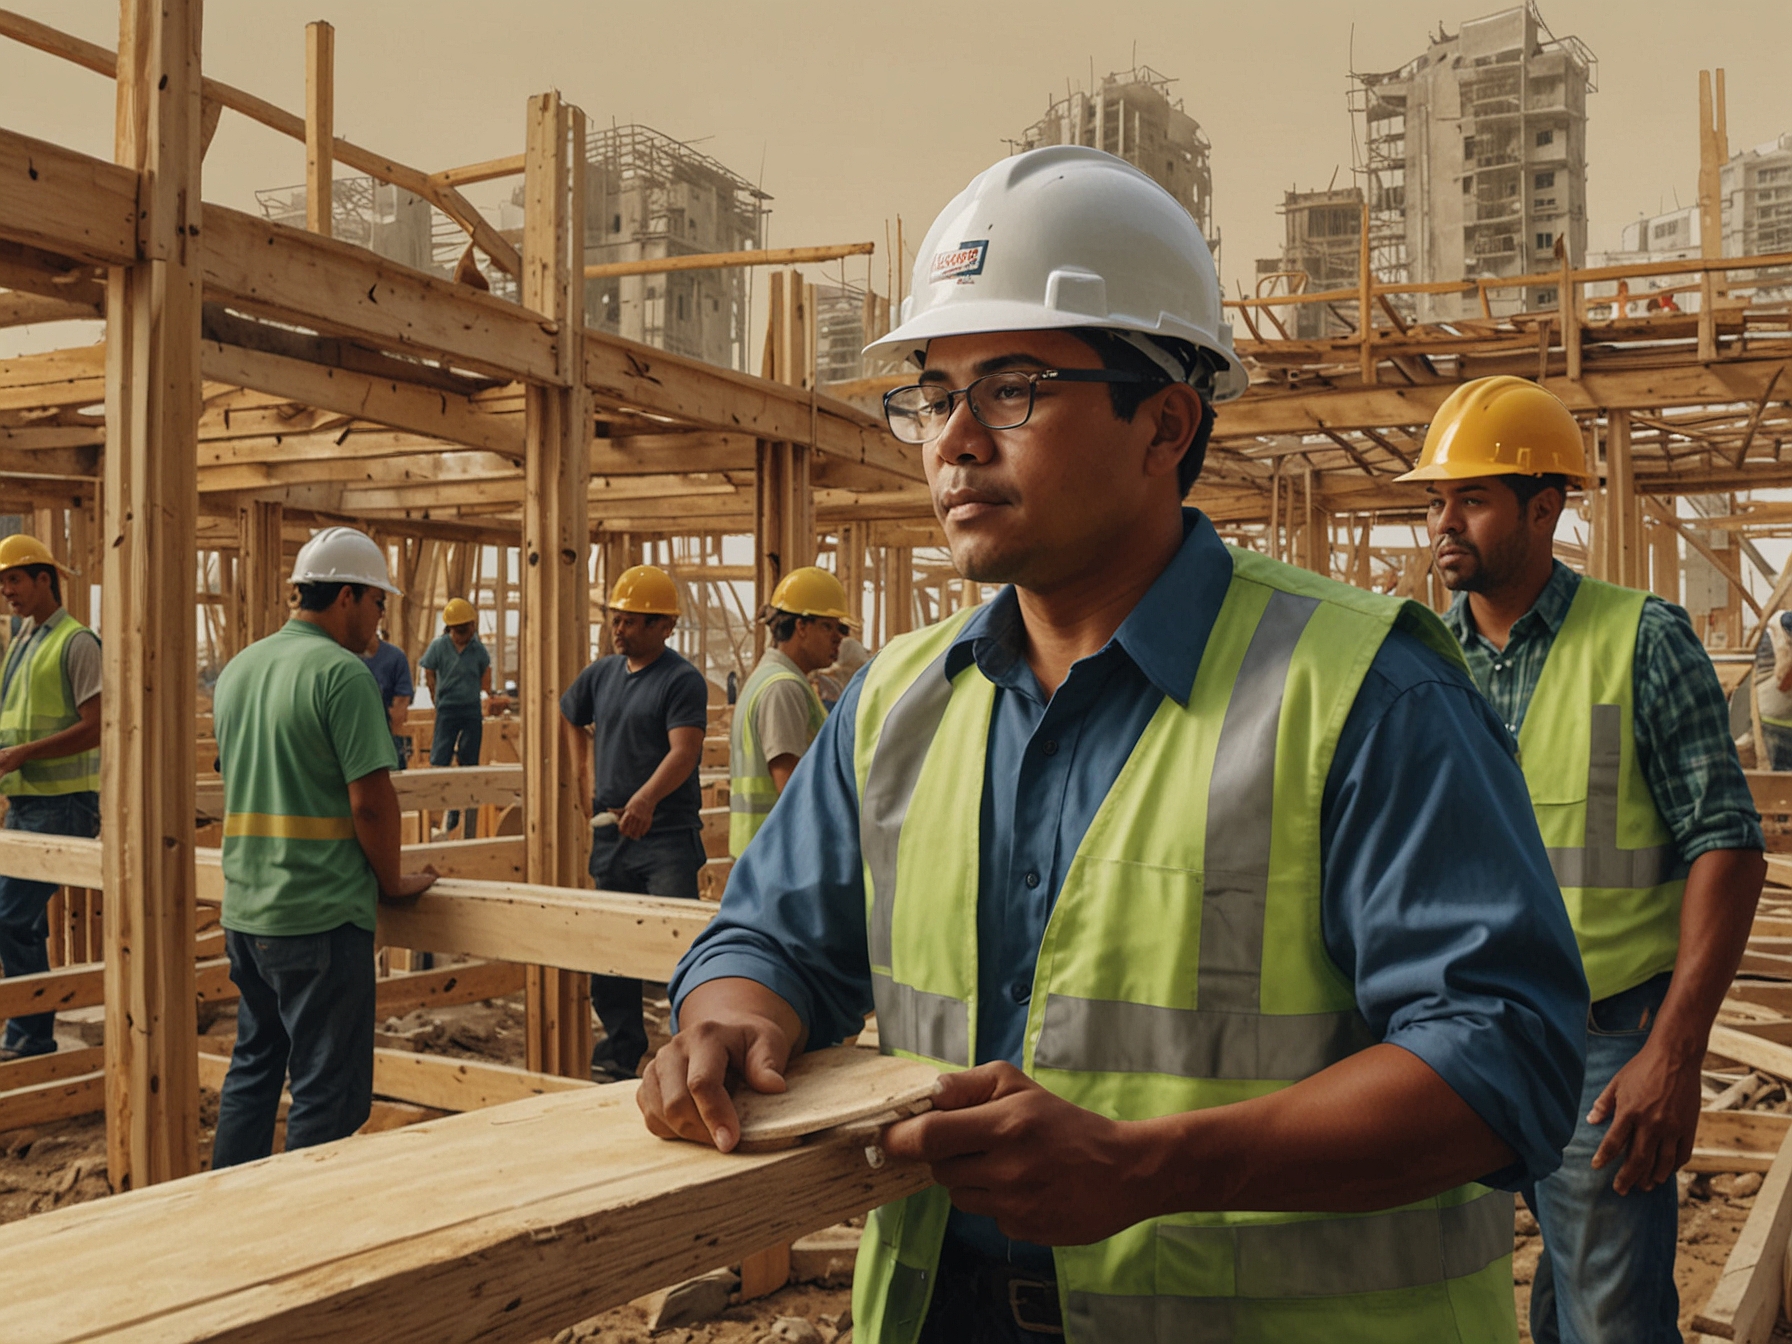 A bustling construction site with a mix of native and immigrant workers collaborating efficiently, highlighting the importance of diverse labor in the homebuilding industry.